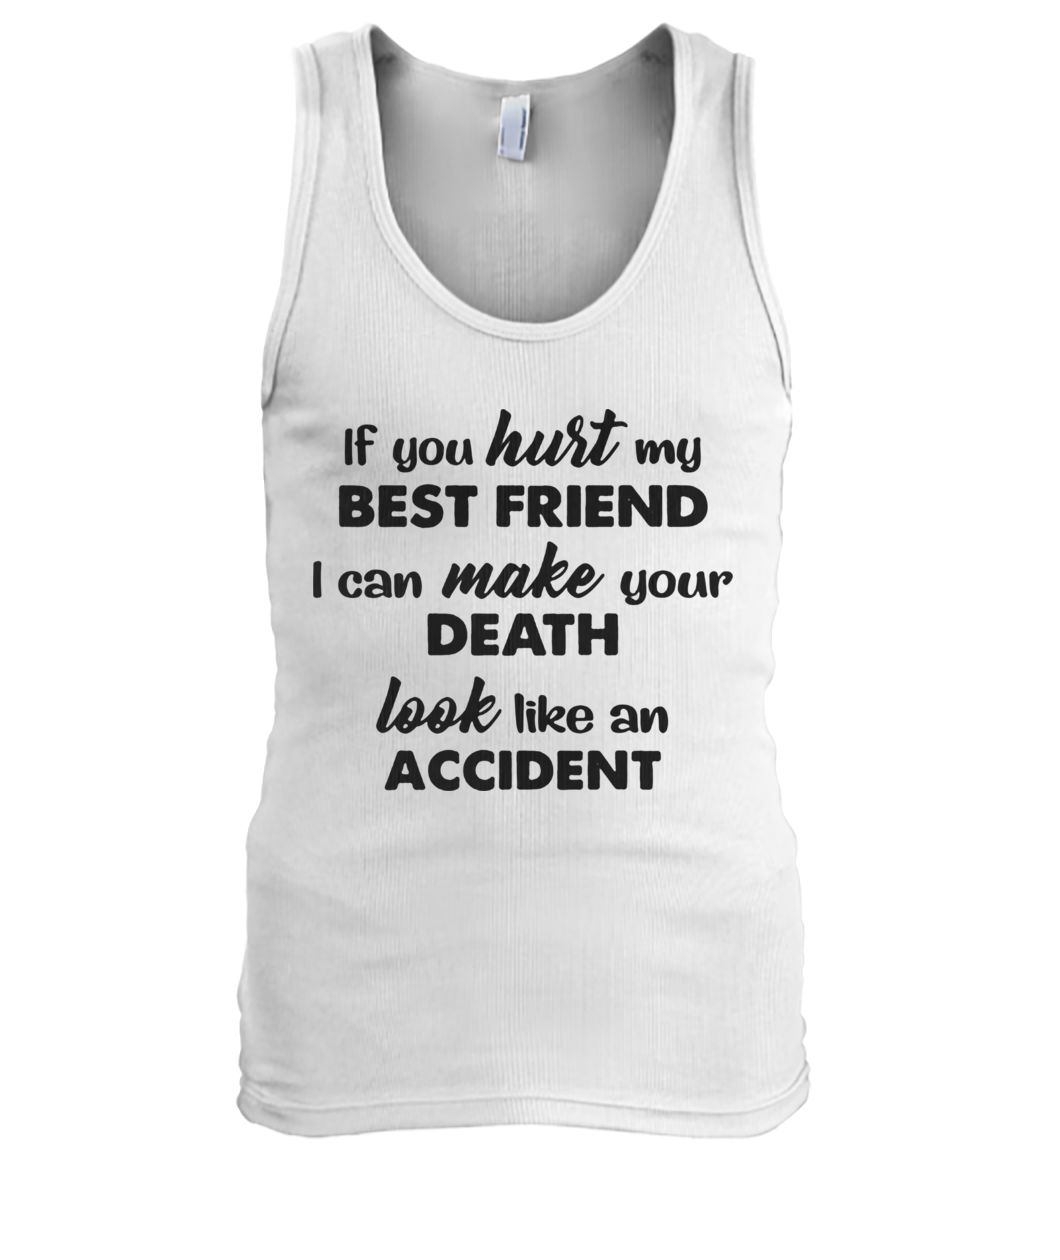 If you hurt my best friend I can make your death look like an accident men's tank top